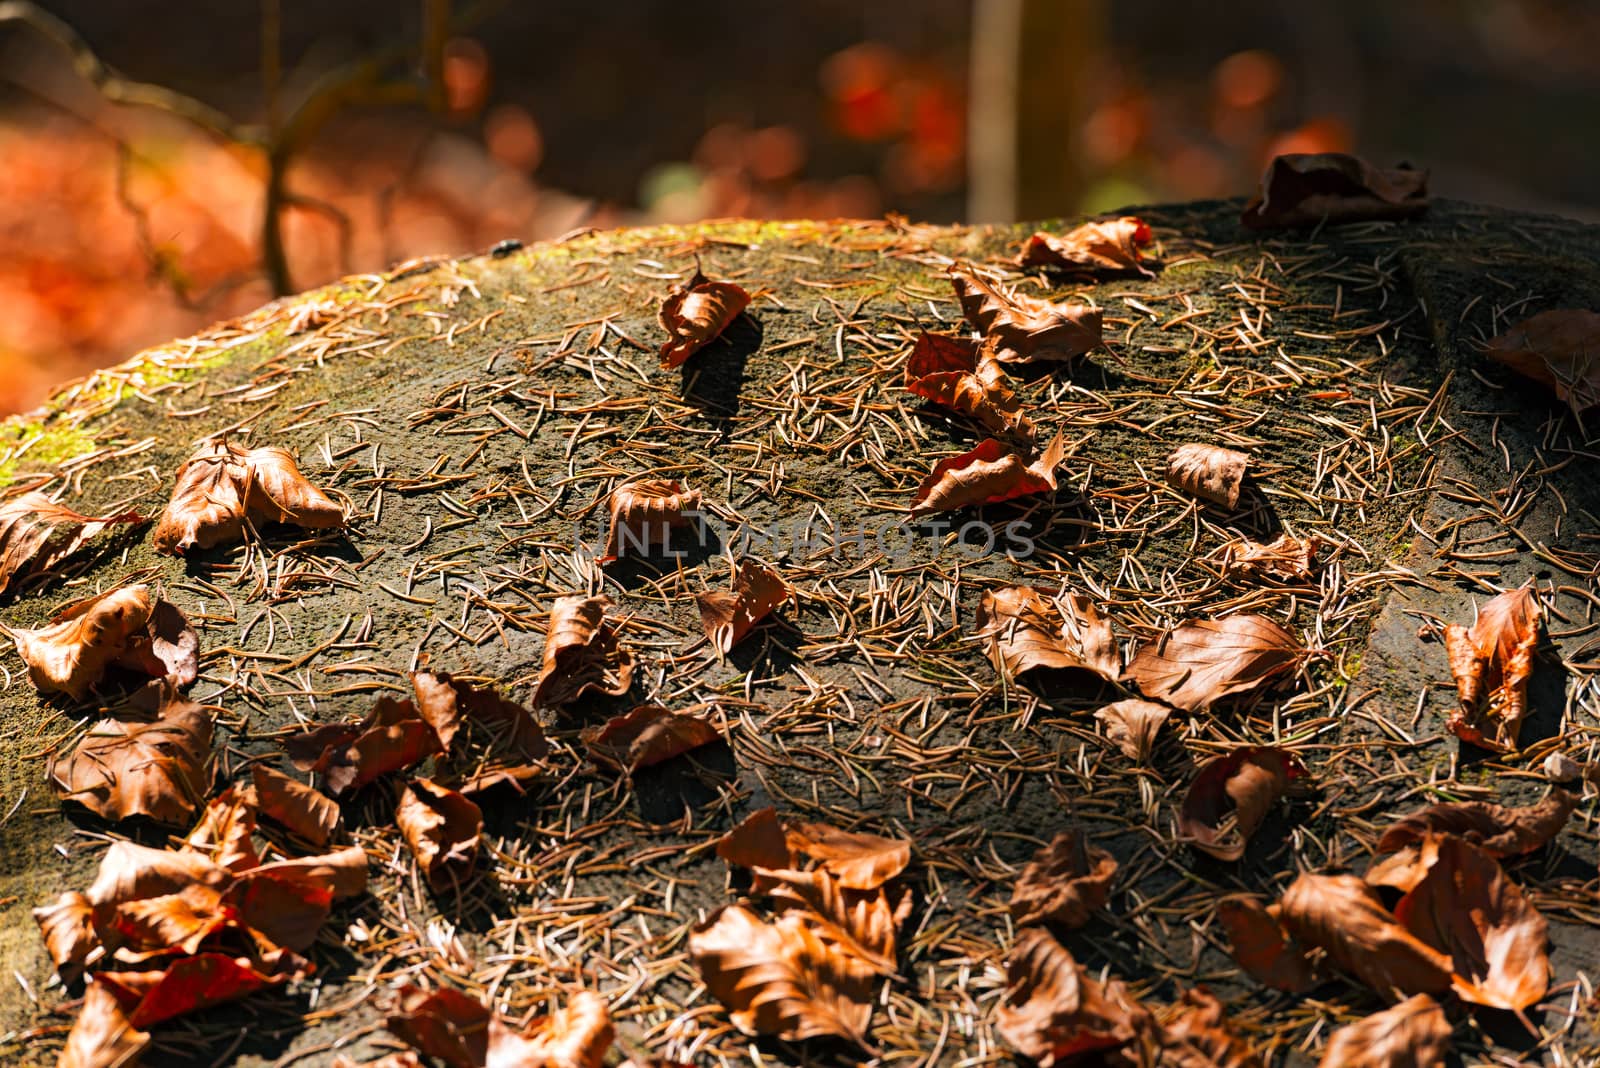 Old tree stump with pine needles and brown dry leaves in the undergrowth